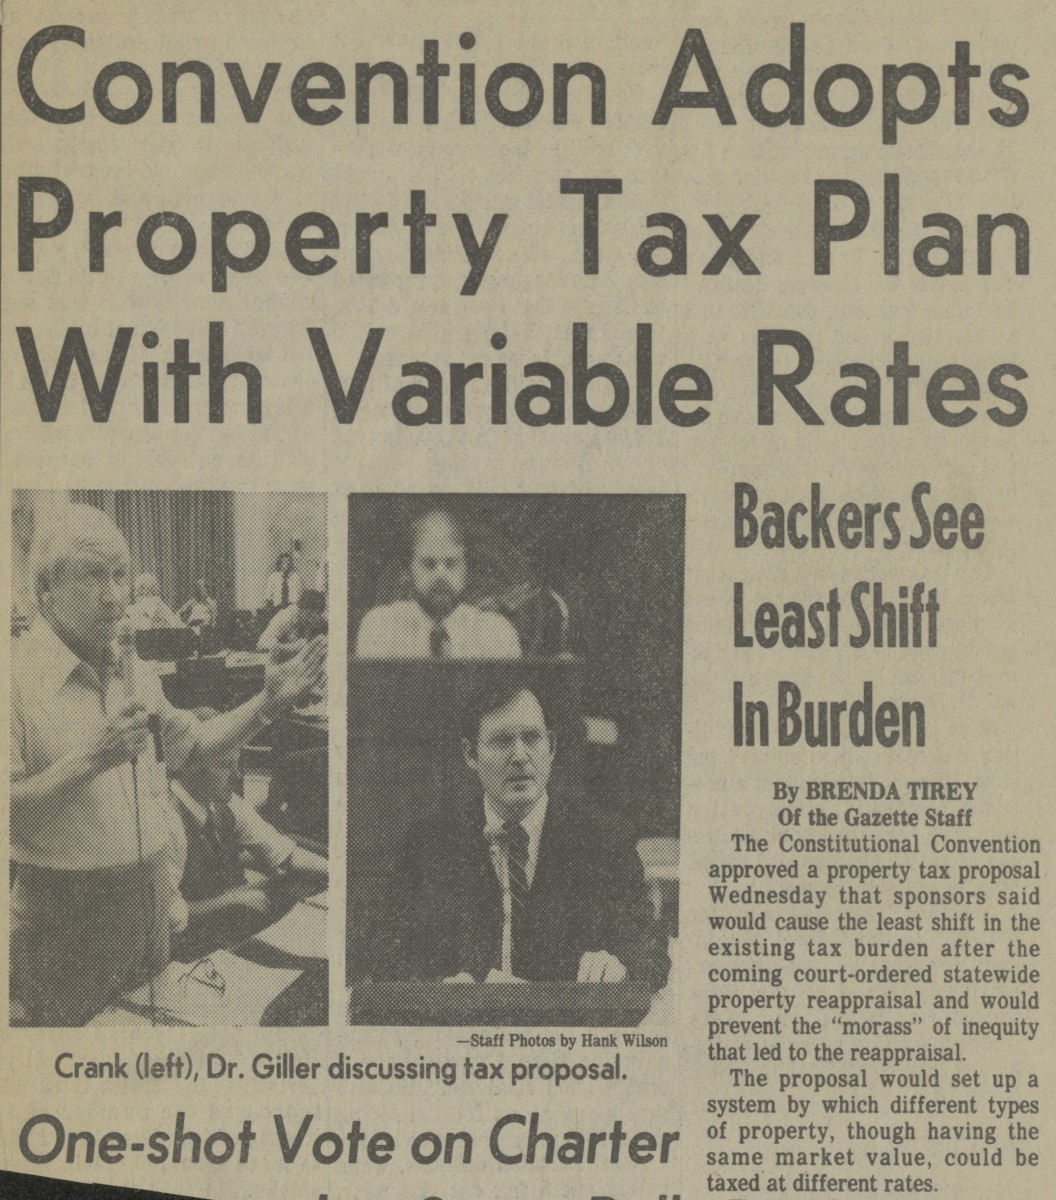 Newspaper clipping  titled, "Convention Adopts Property Tax Plan With Variable Rates: Backers See least Shift in Burden"